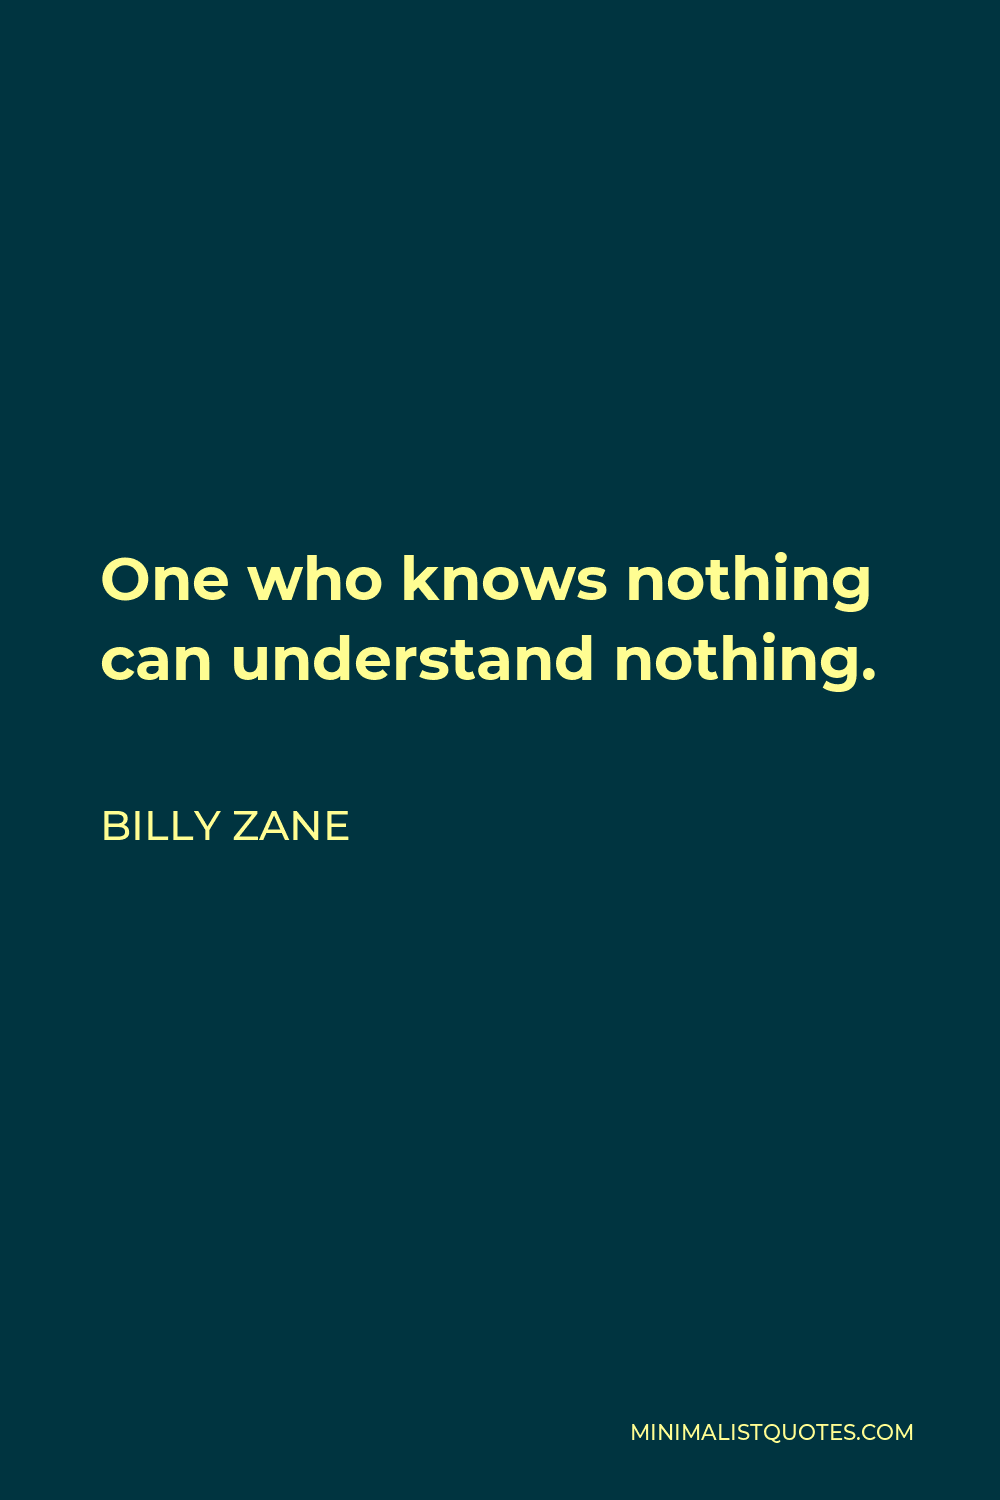 Billy Zane Quote - One who knows nothing can understand nothing.